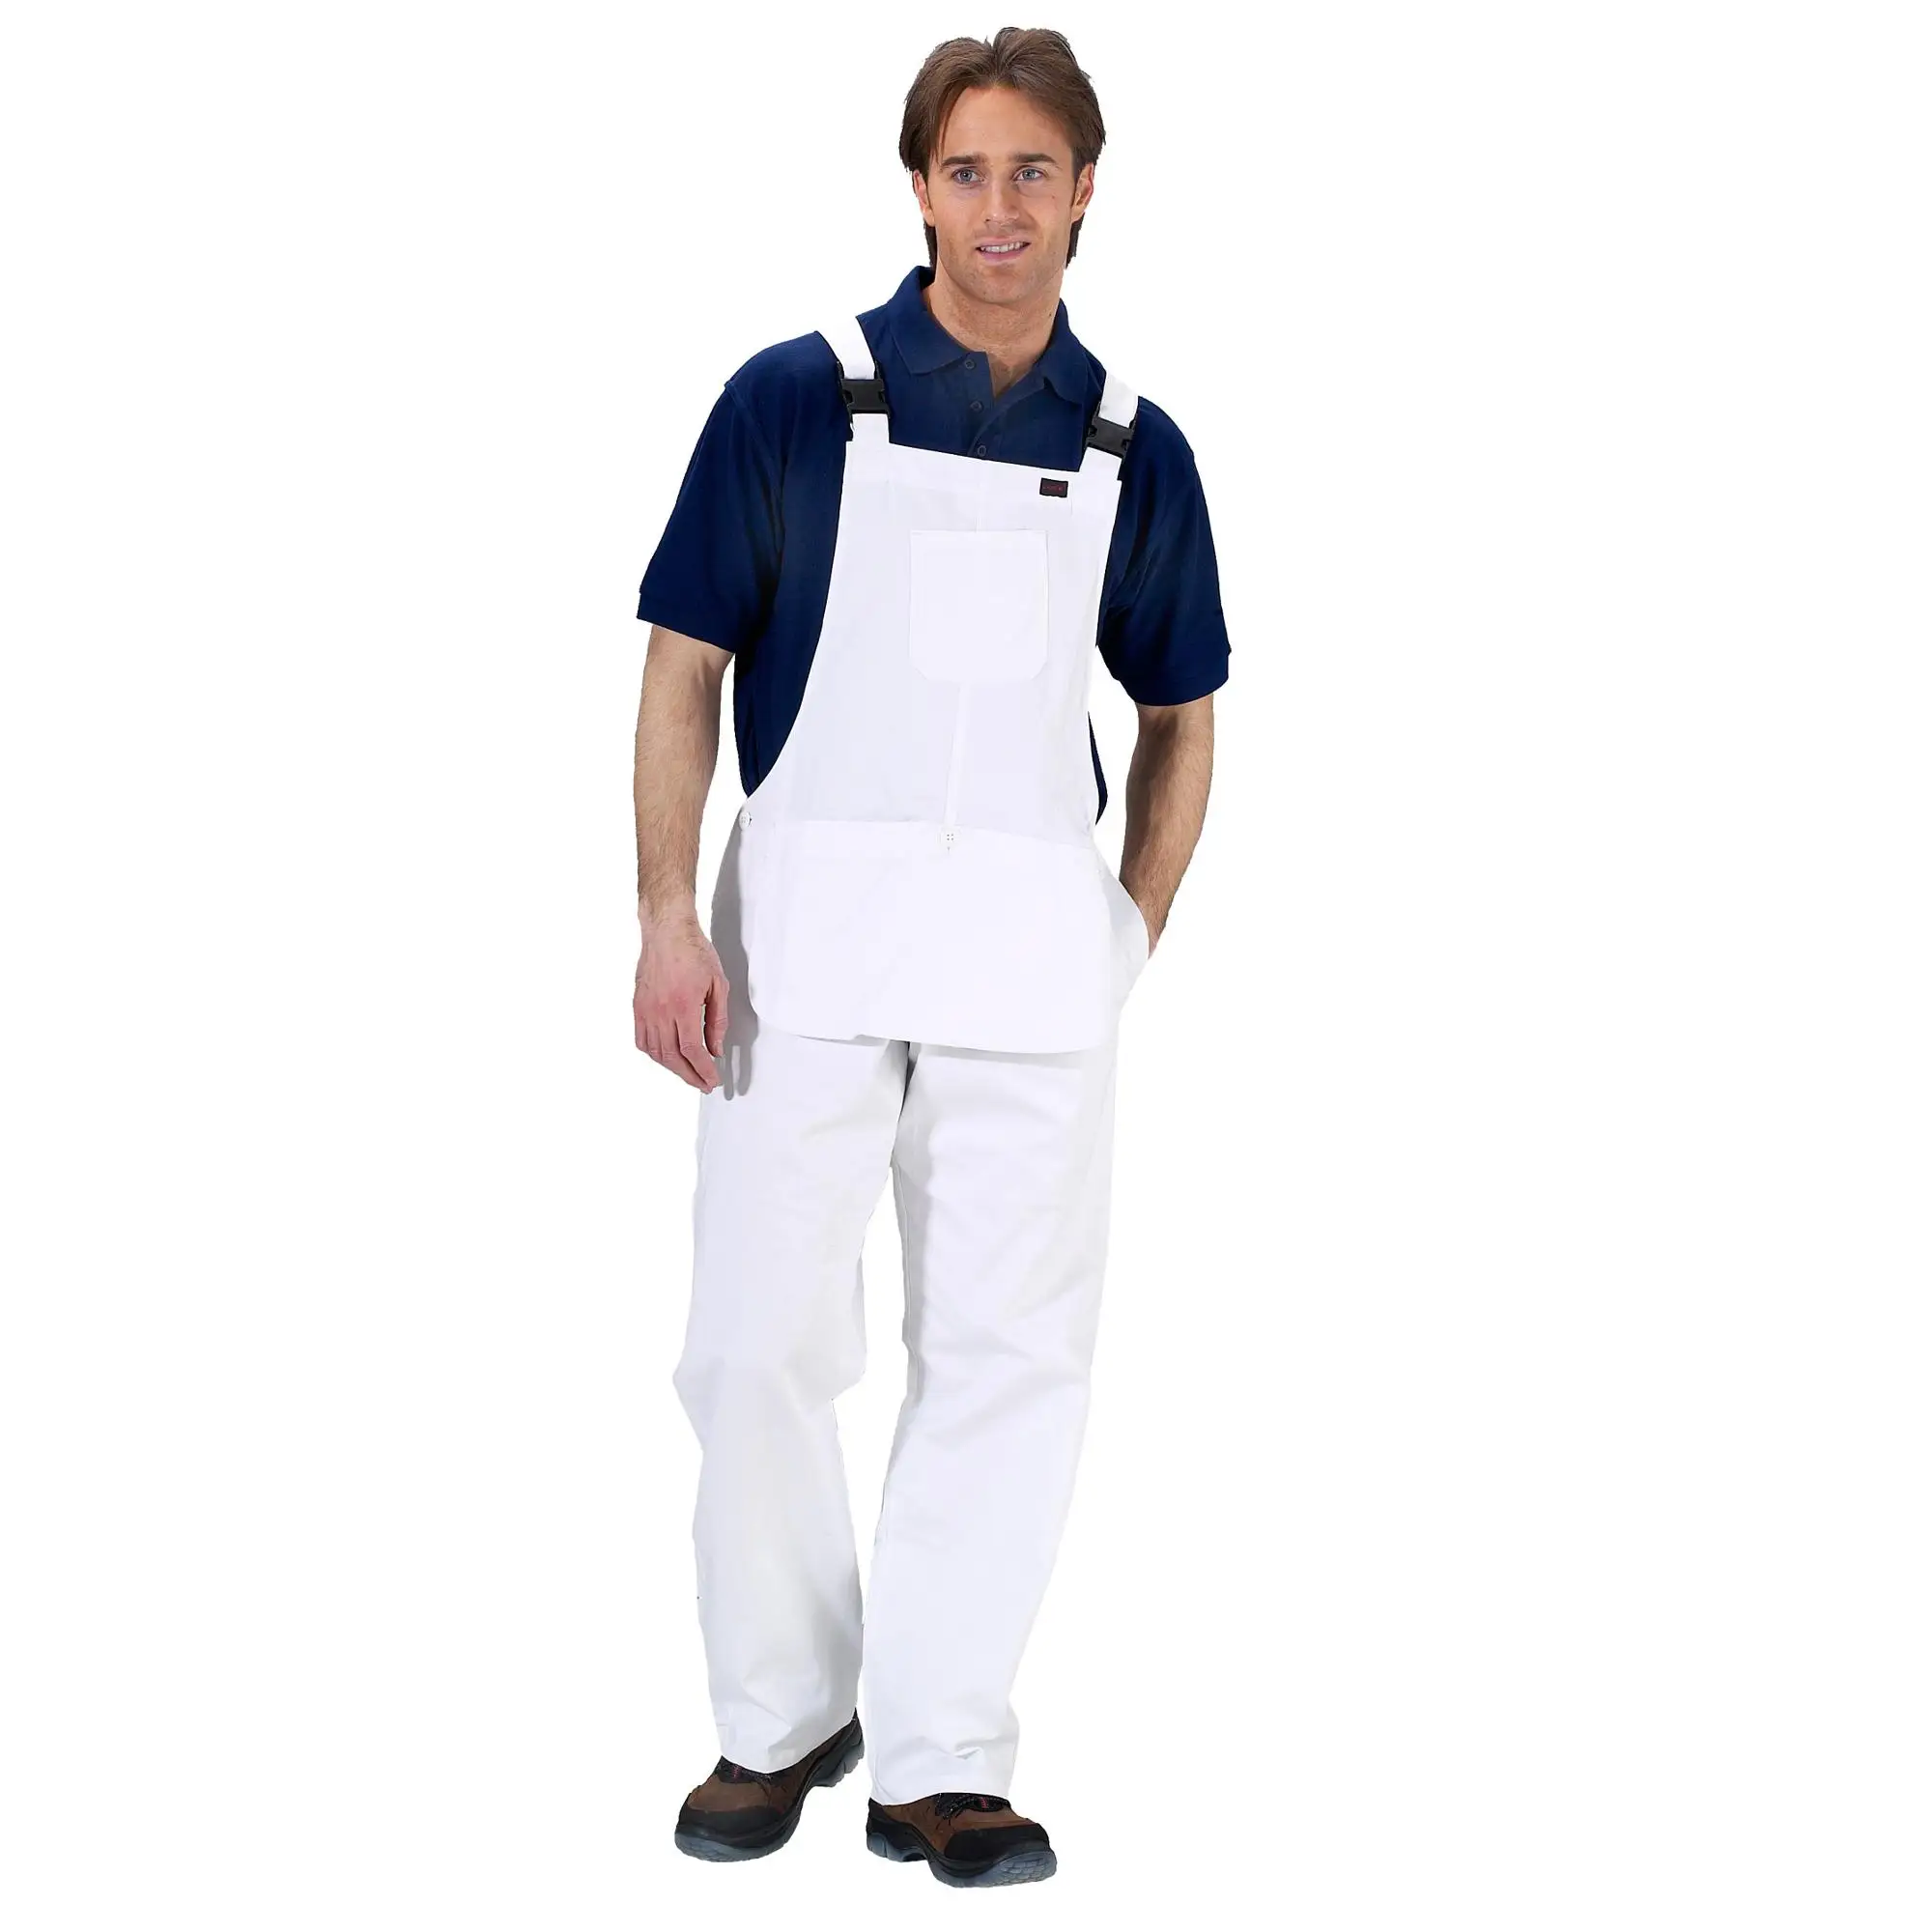 New Cotton  Bib And Brace Painters coveralls 